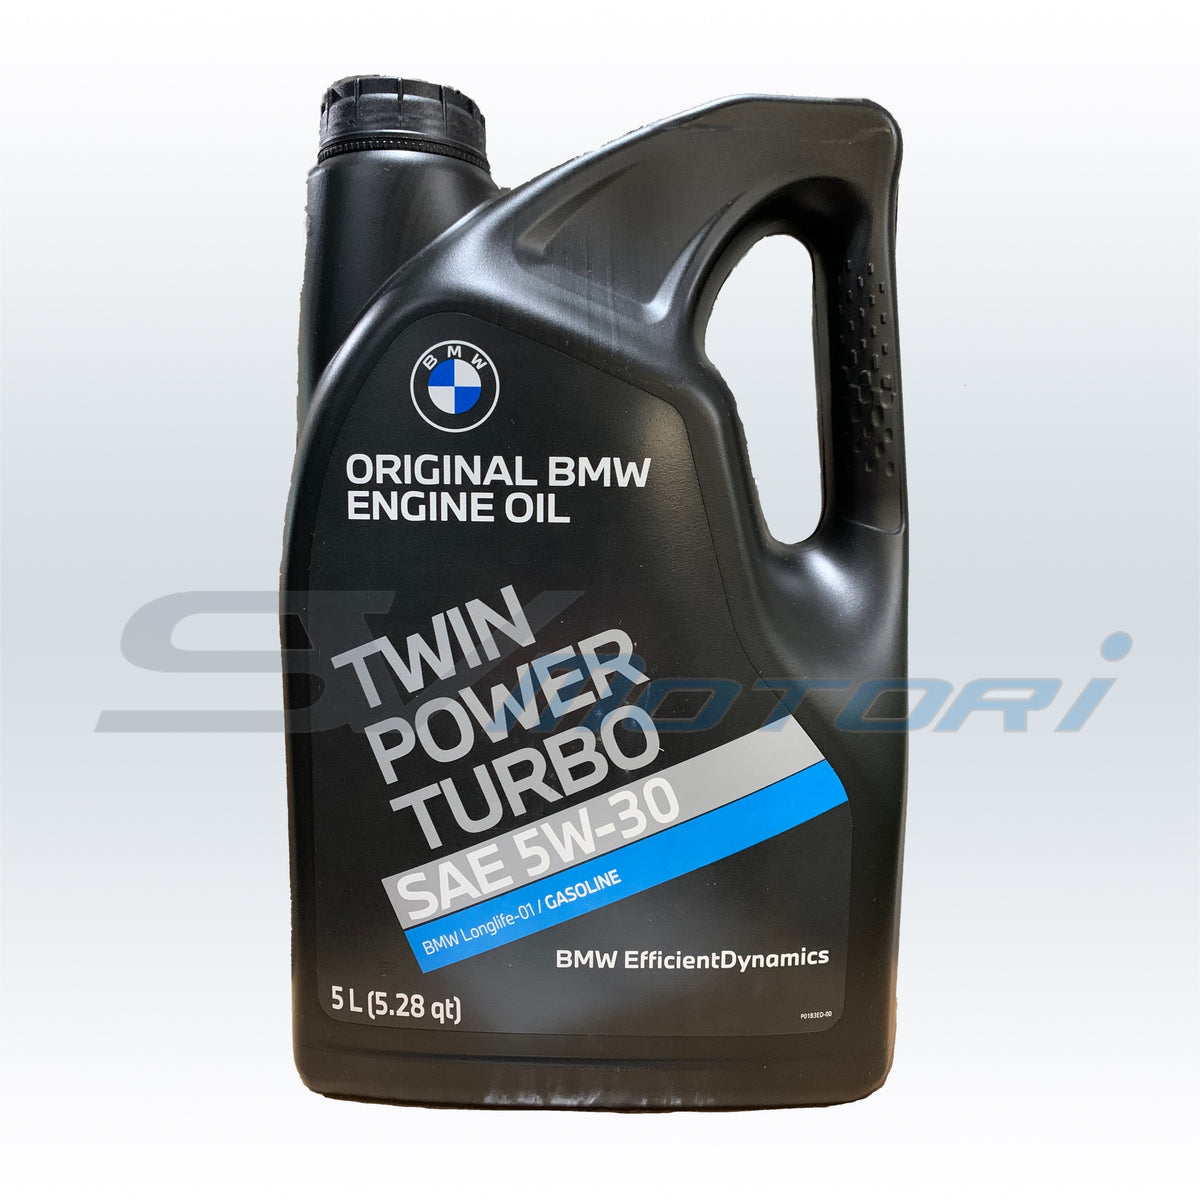 BMW 5W30 LL-01 Twin Power Turbo Synthetic Oil - 5 Liter